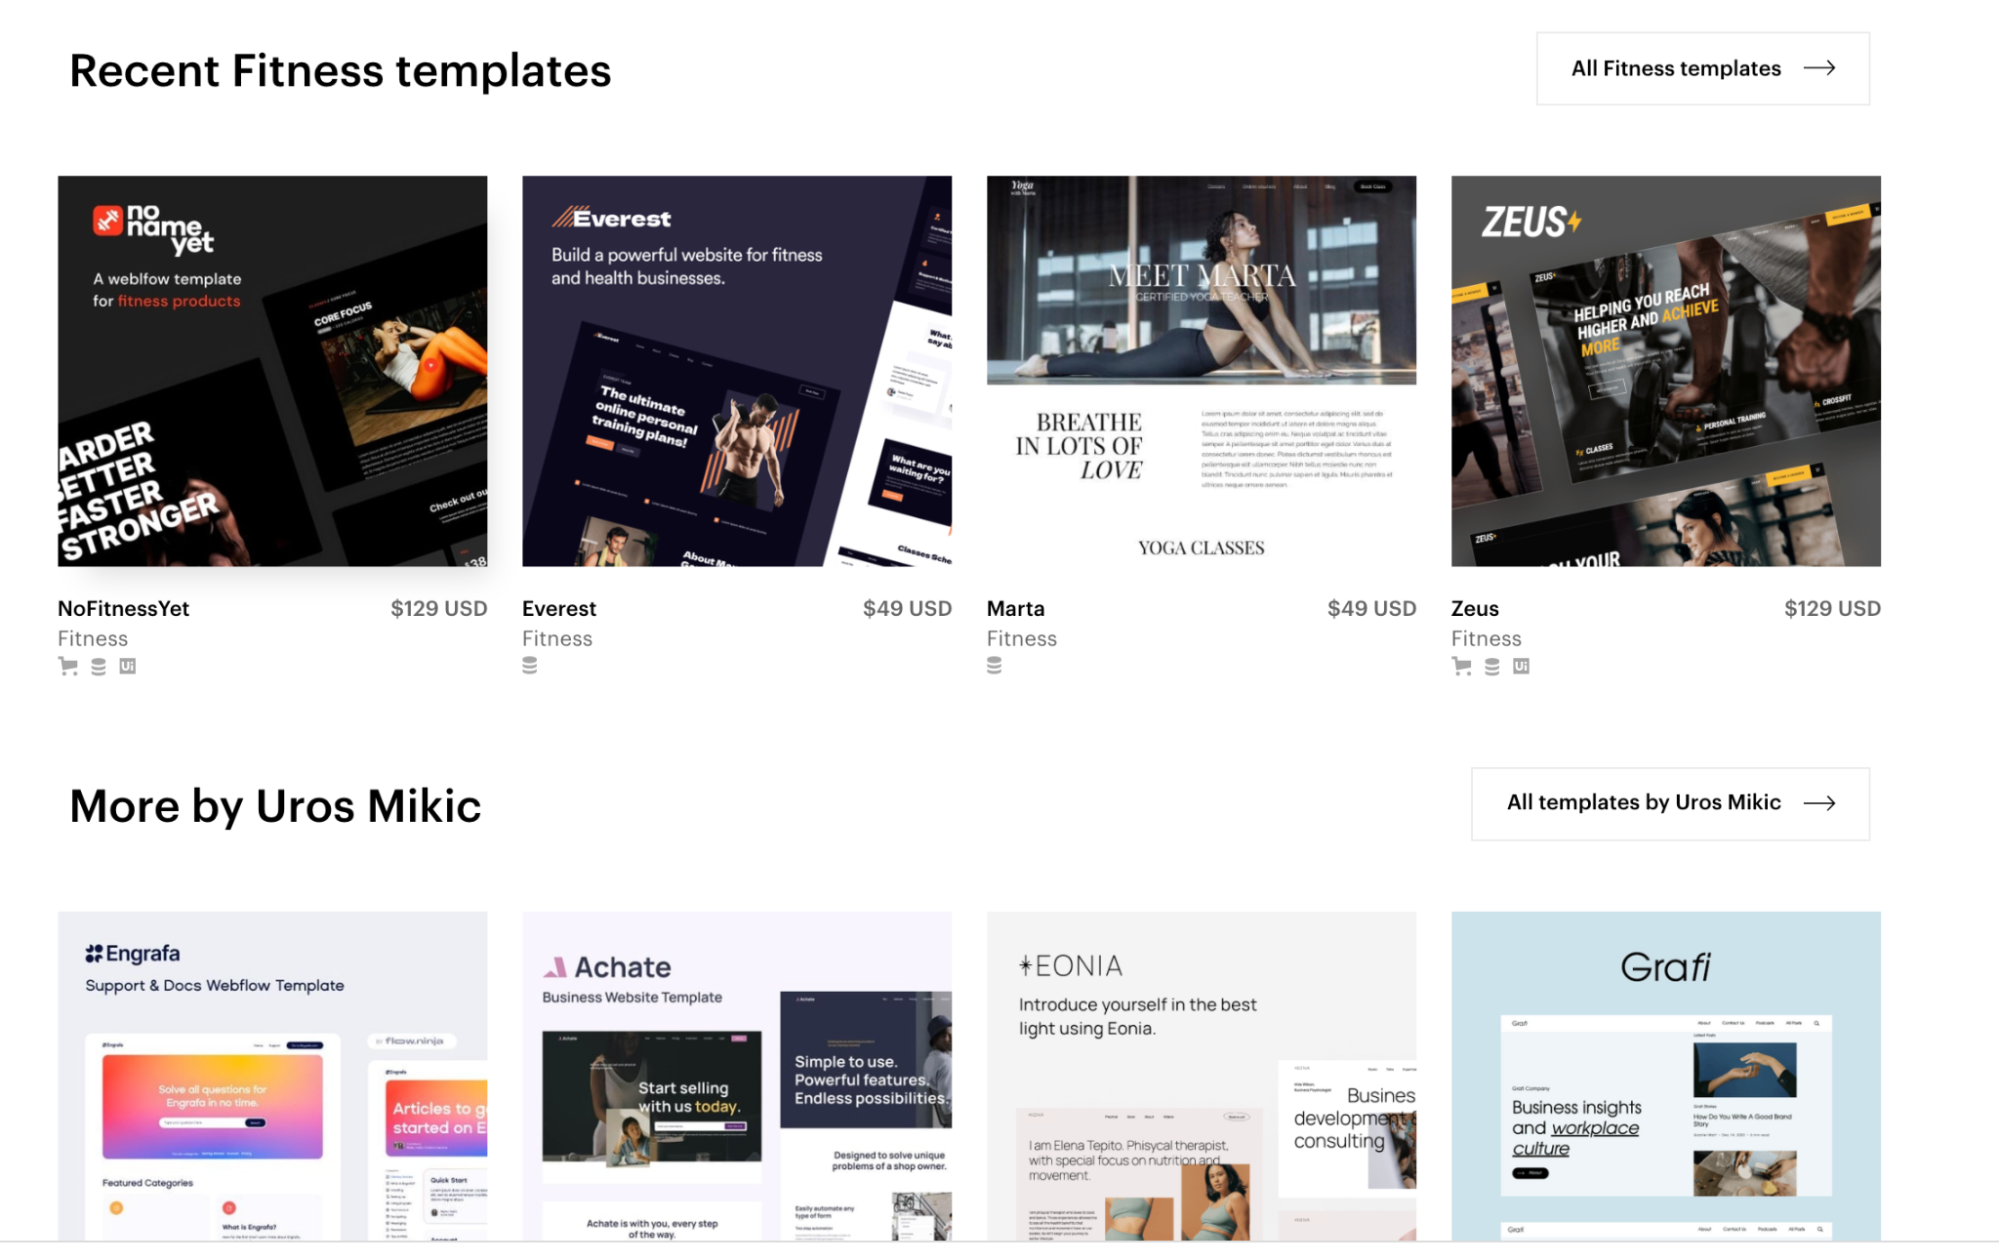 Webflow recommendations for recent fitness templates and more by the template creator